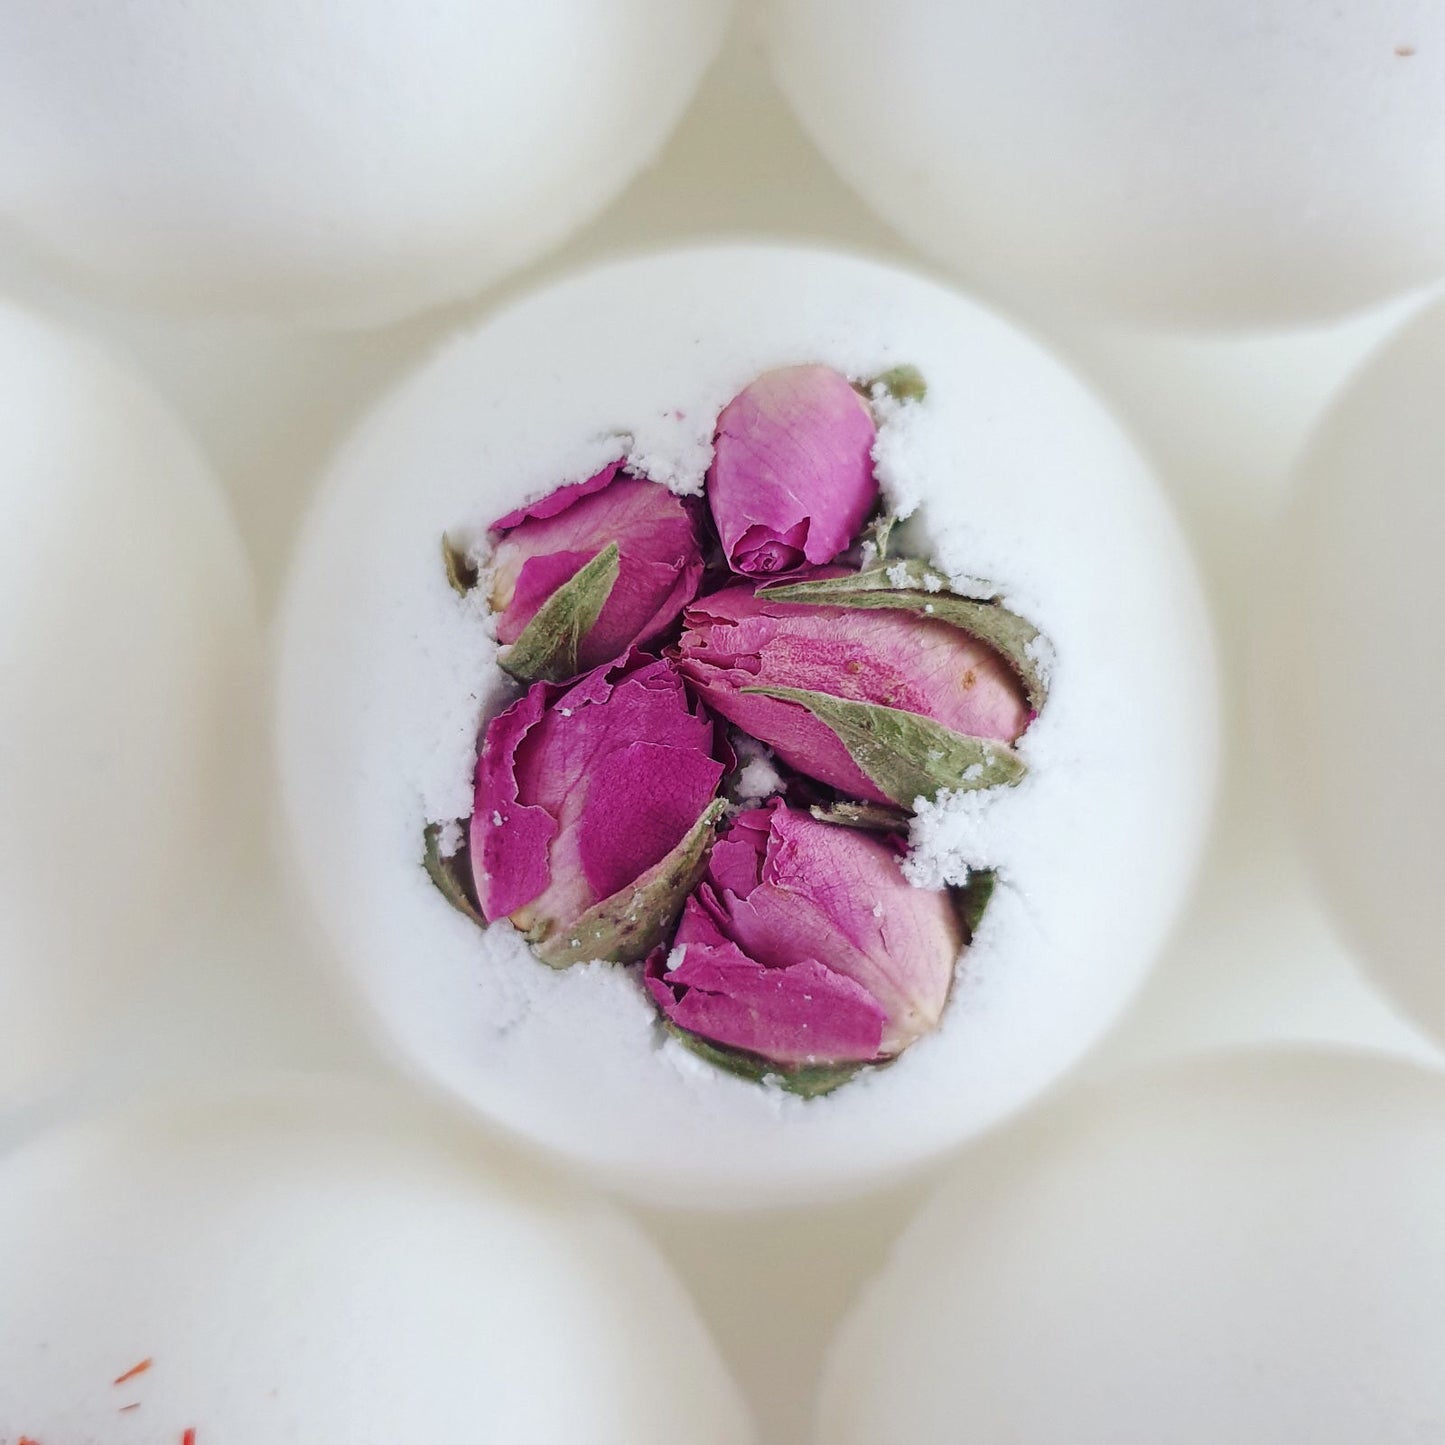 Rose Secret Bath Bomb, decorated with pink dried rose buds. Photographed from the top to showcase its beauty. Handcrafted by The Eden Collections